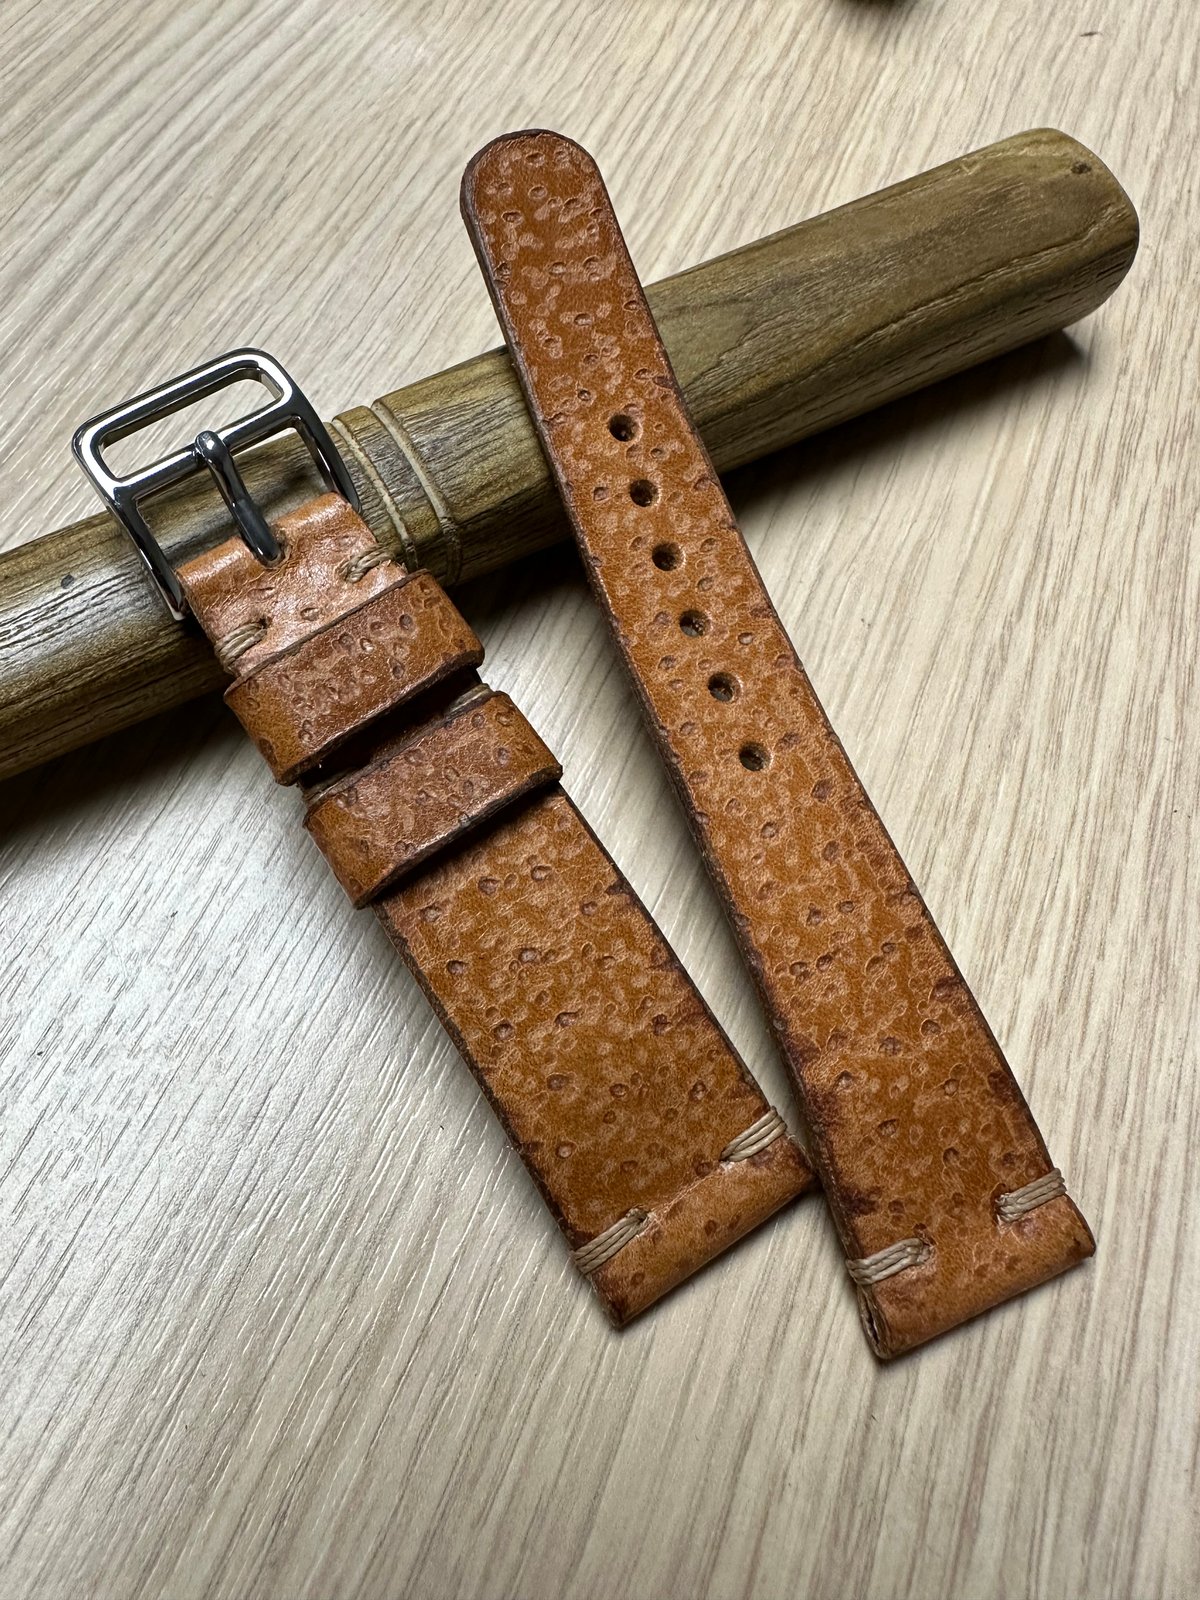 Image of Limited Edition "Hailstone" Tan Calfskin - Hand Distressed Watch Strap